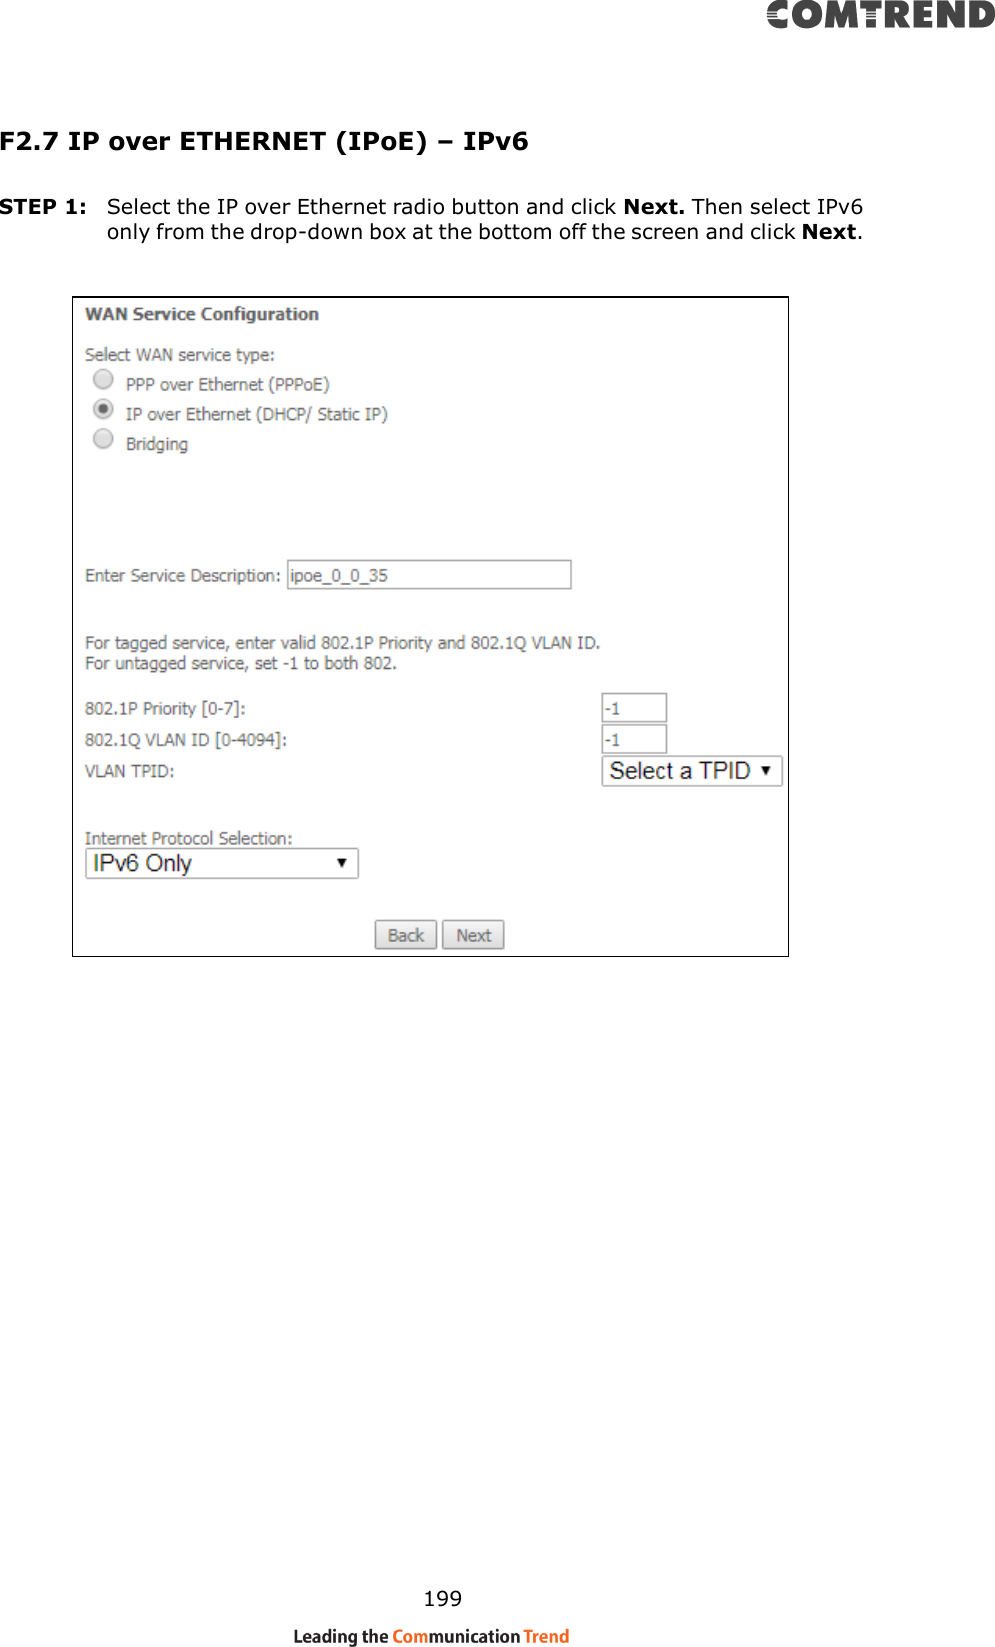    199 F2.7 IP over ETHERNET (IPoE) – IPv6 STEP 1:  Select the IP over Ethernet radio button and click Next. Then select IPv6 only from the drop-down box at the bottom off the screen and click Next.             